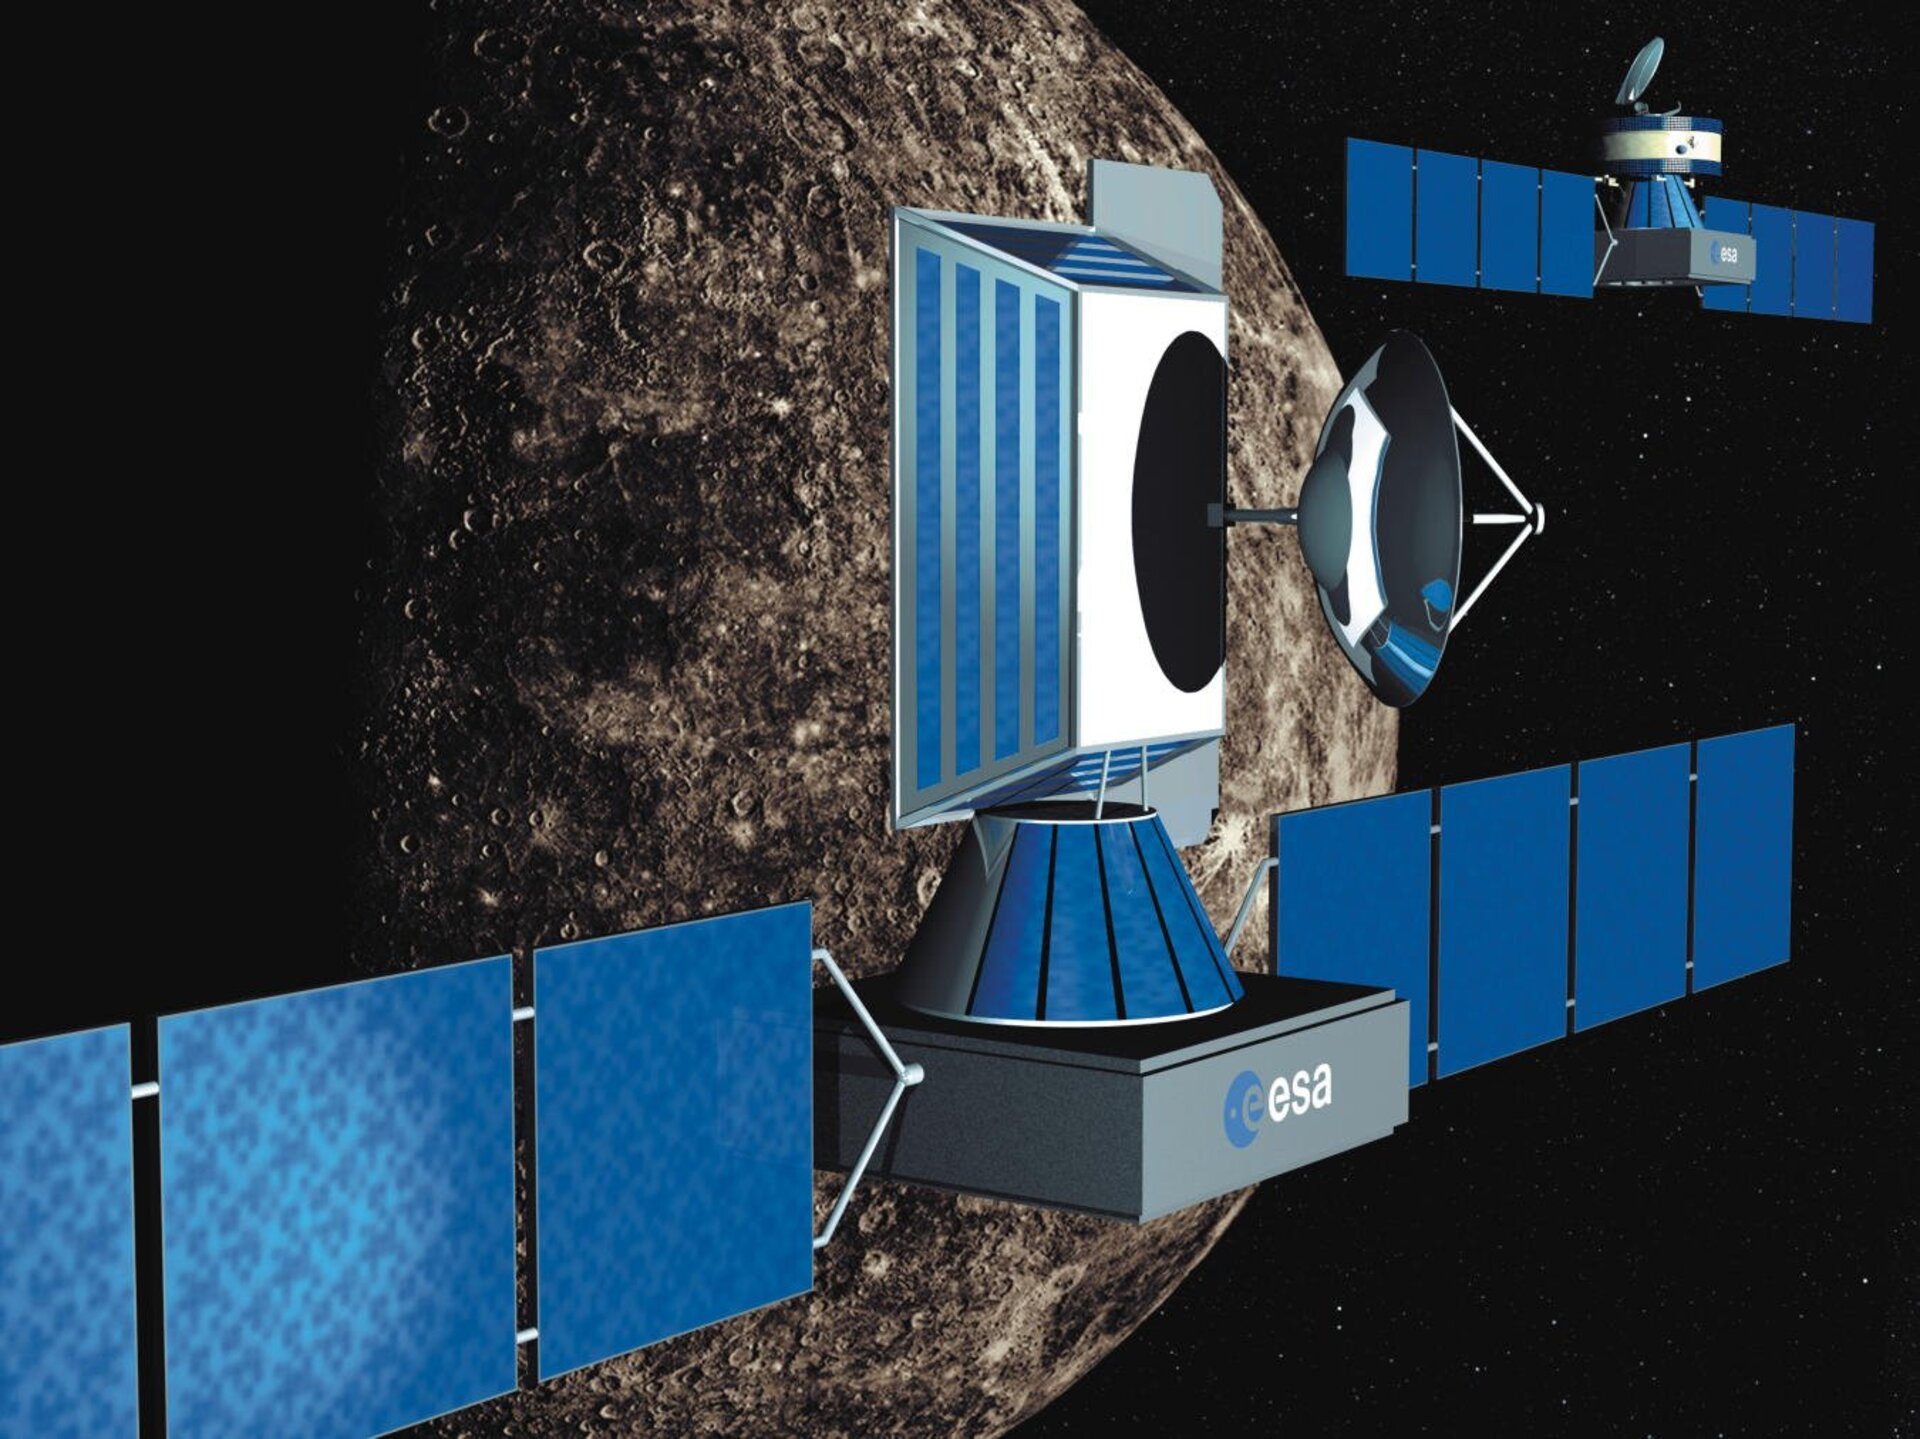 BepiColombo will be the first mssion to reap the rewards of this initiative